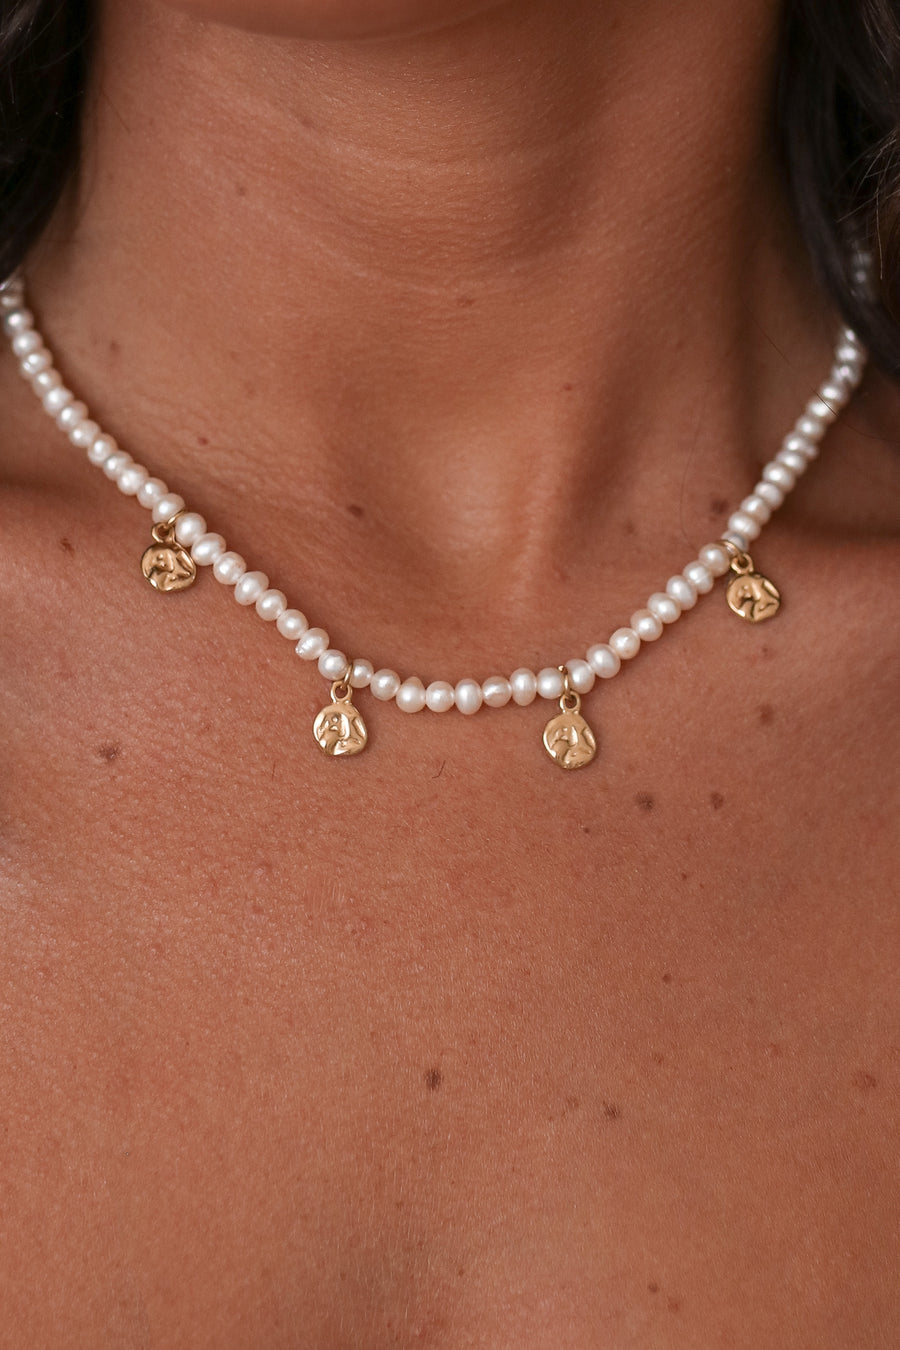 Claire - 18ct Gold or Silver Stainless Steel Pearl Necklace